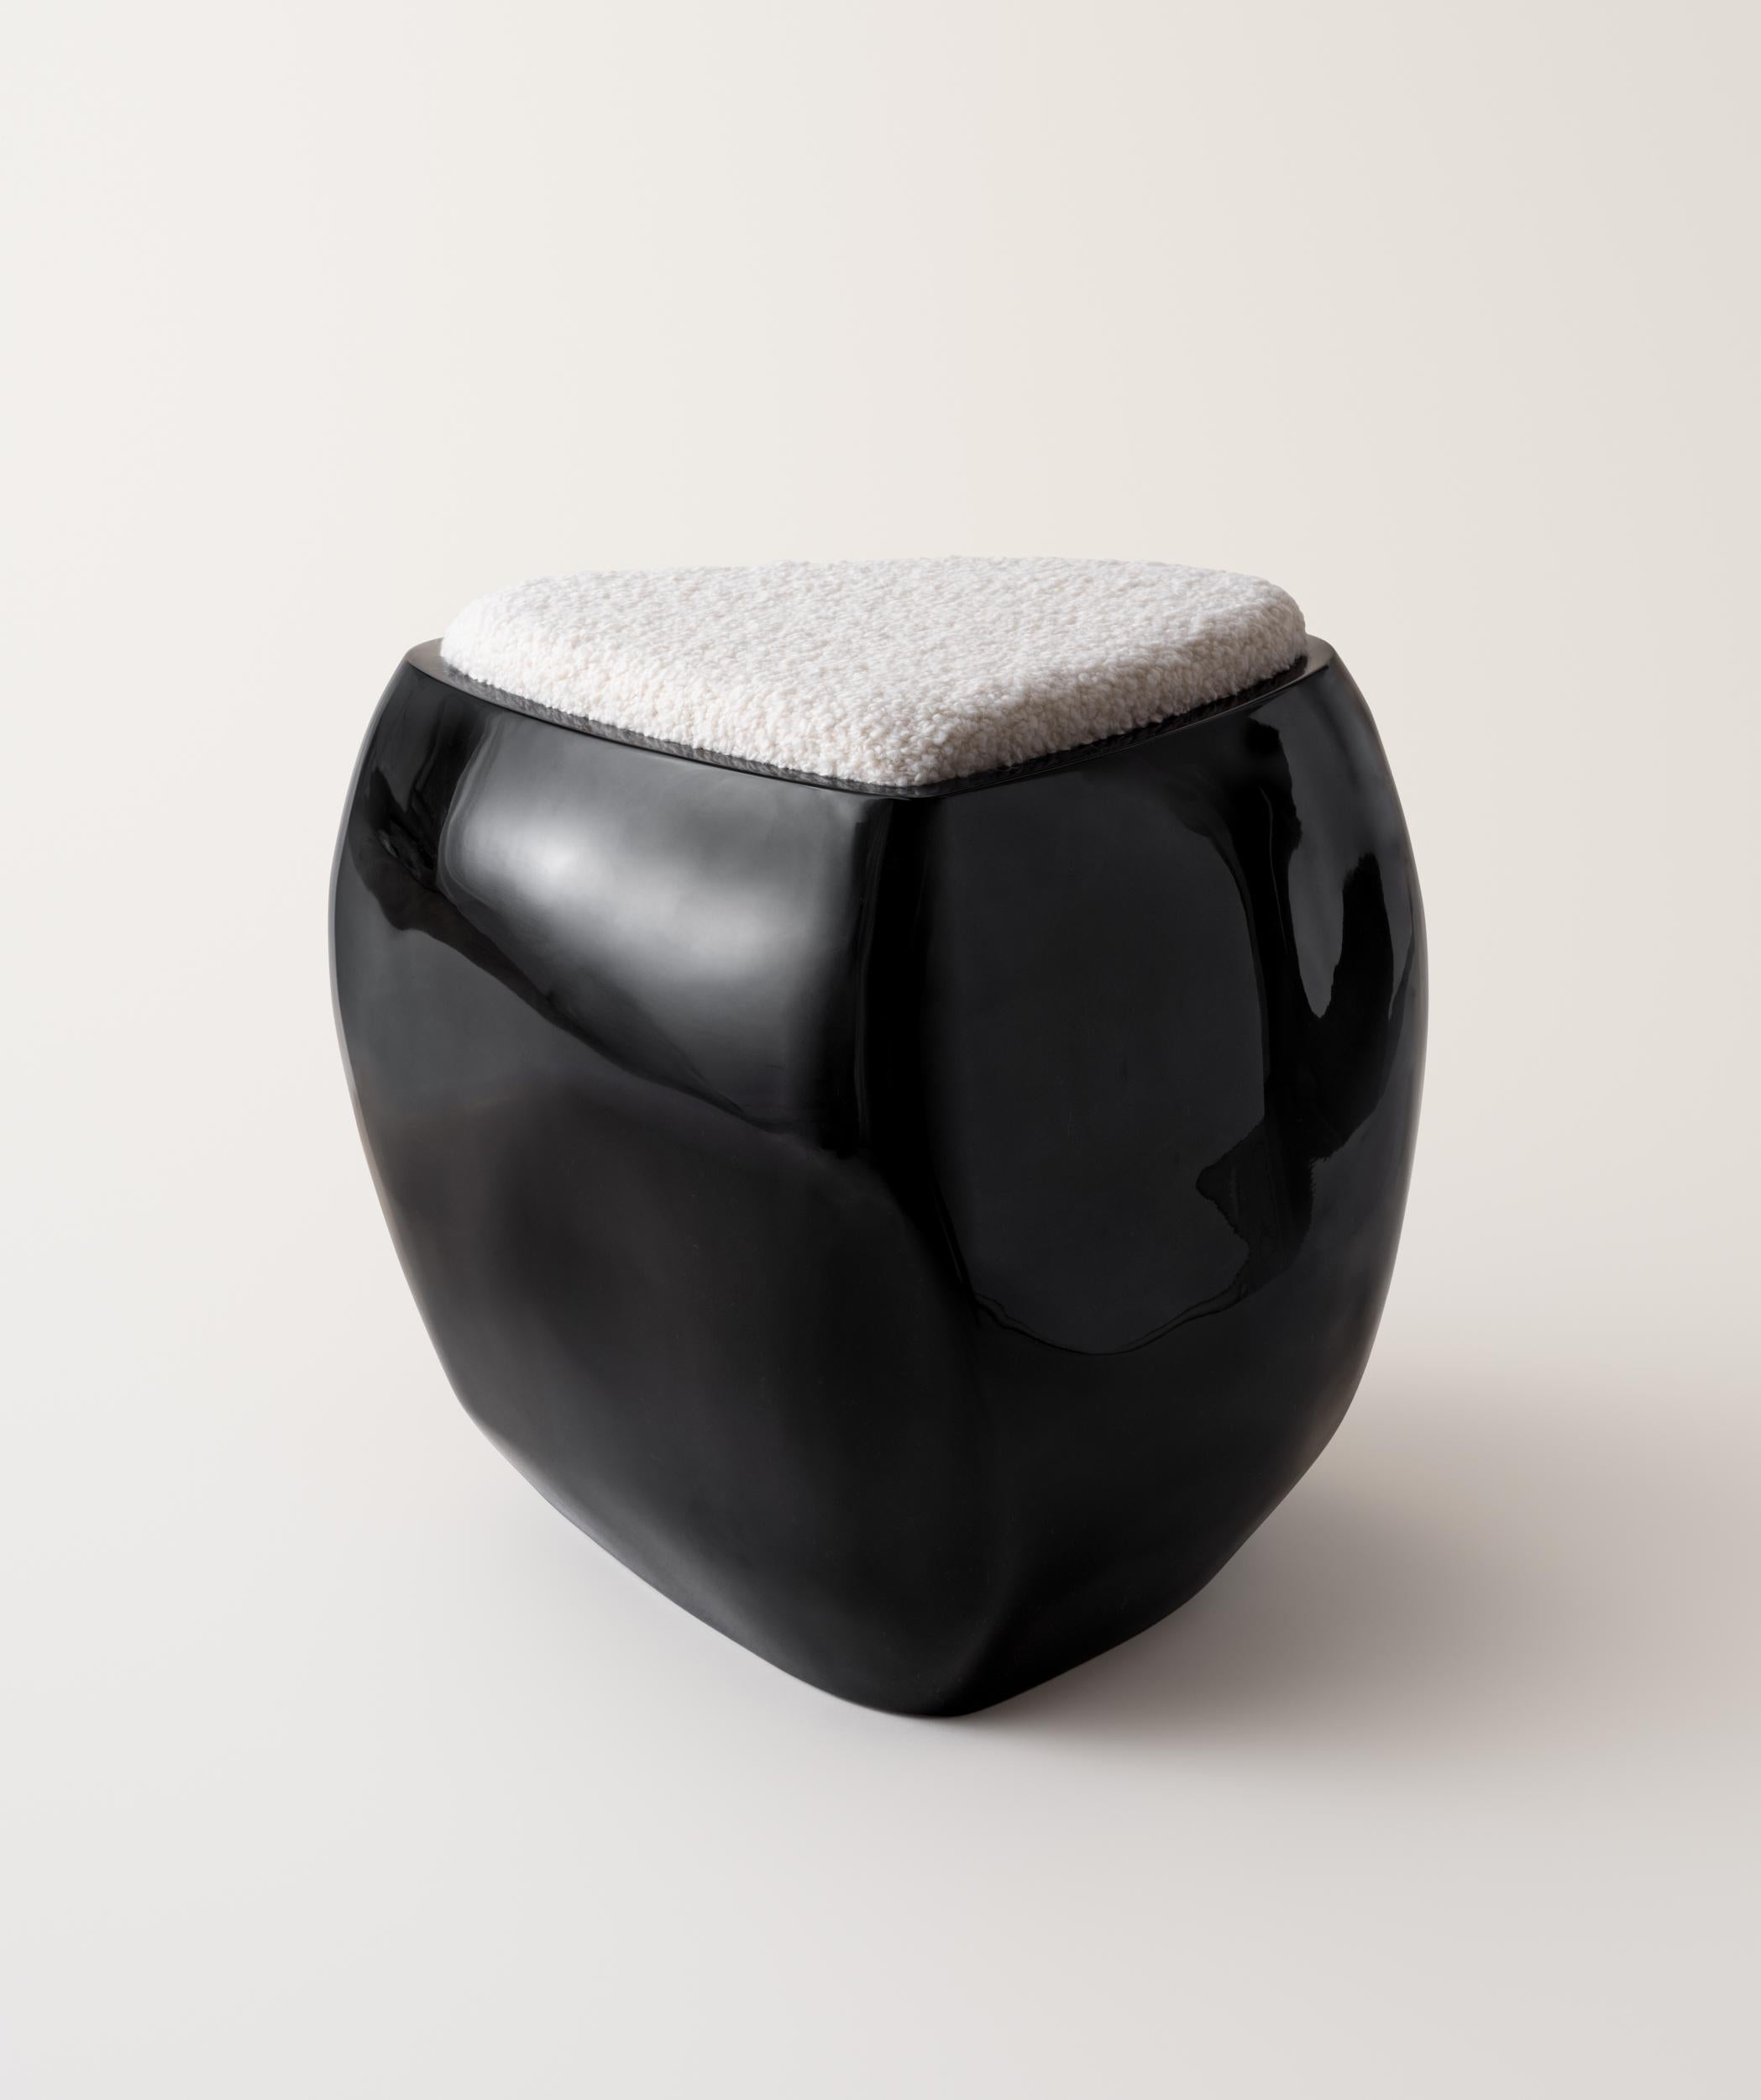 Inspired by stones shaped and polished by ever-evolving bodies of water, the River Stool presents a sculptural, asymmetrical form made up of soft curves and lines. The stool is expertly made by hand-layering fiberglass and gel coat over several